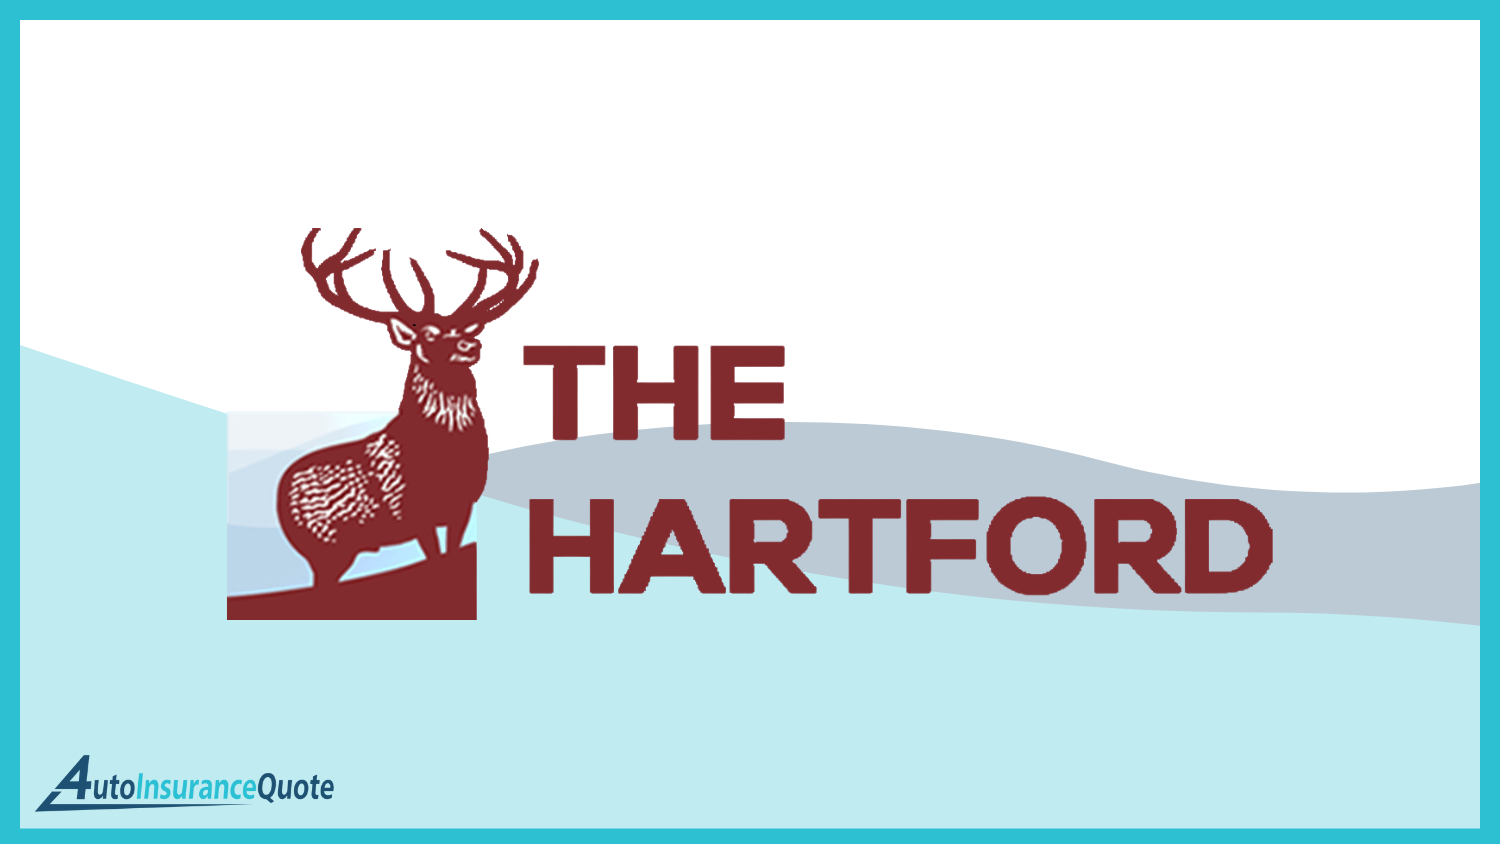 The Hartford: Best Auto Insurance for Government Employees